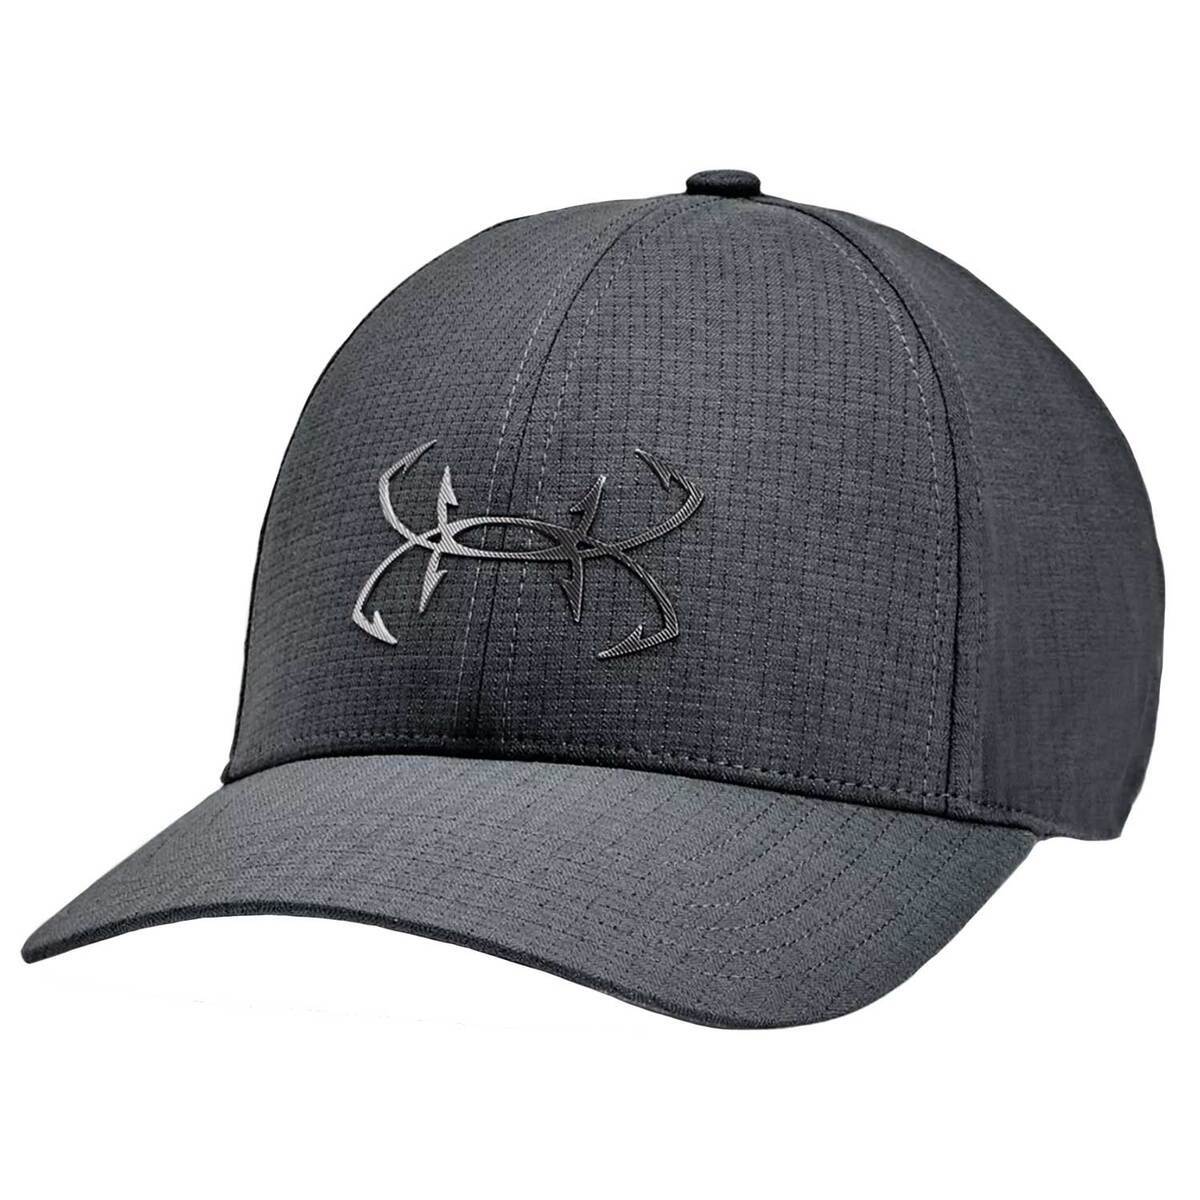 Under Armour Men's Iso-Chill ArmourVent Fish Adjustable Cap